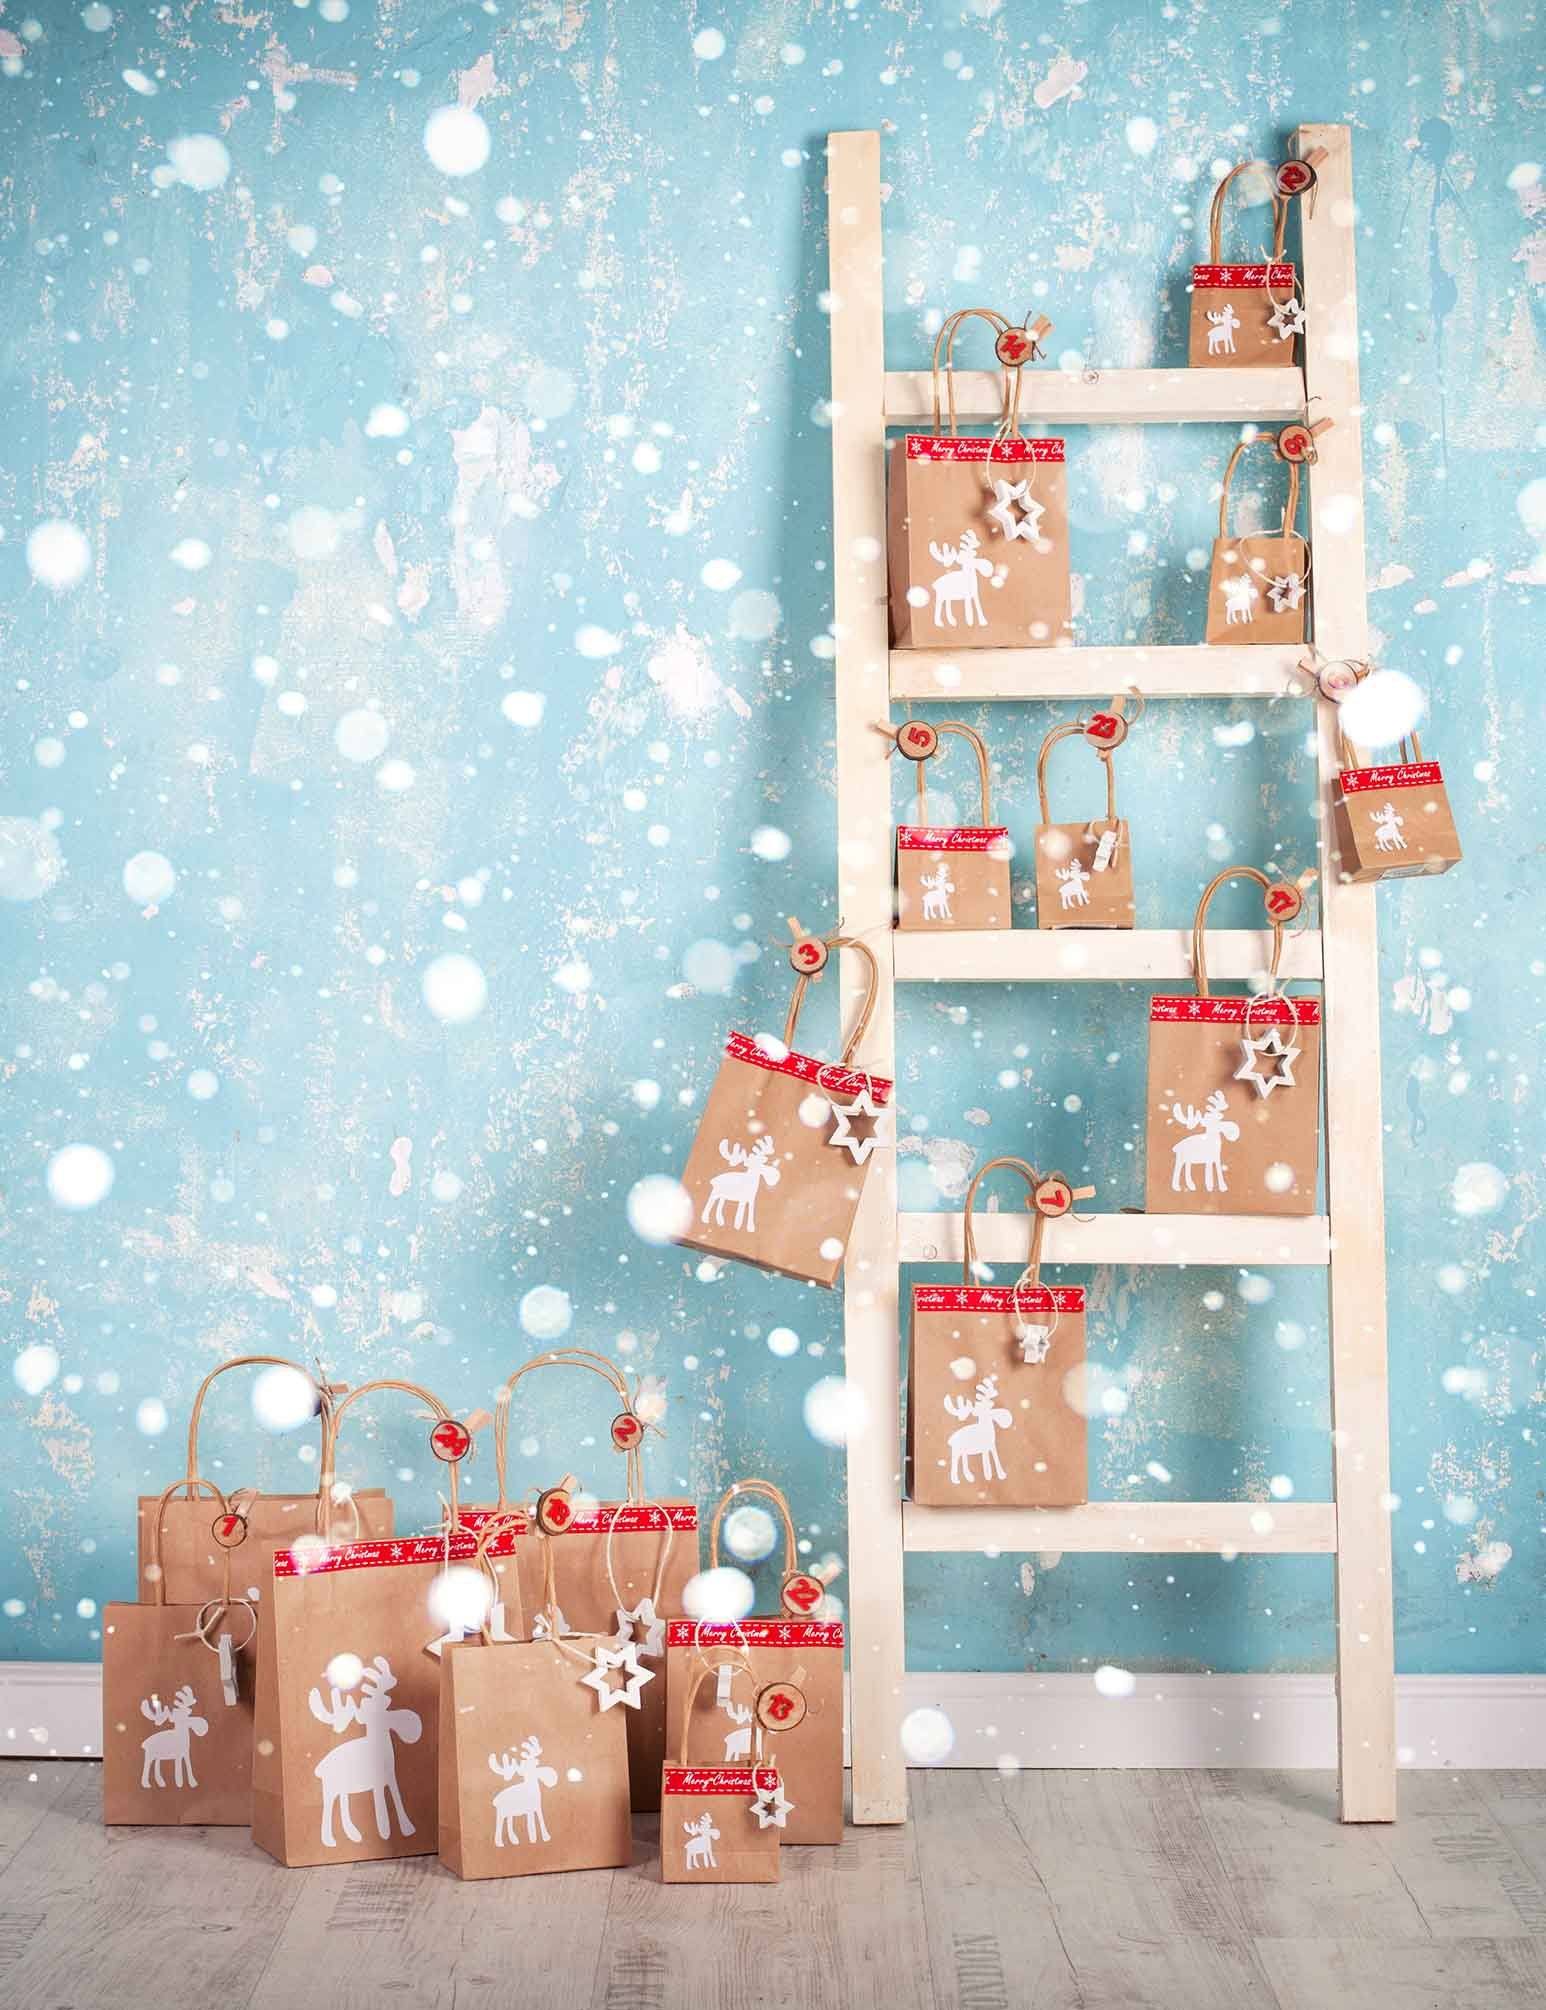 Stepladder Christmas Gifts With Snow Bokeh For Children Backdrop Shopbackdrop